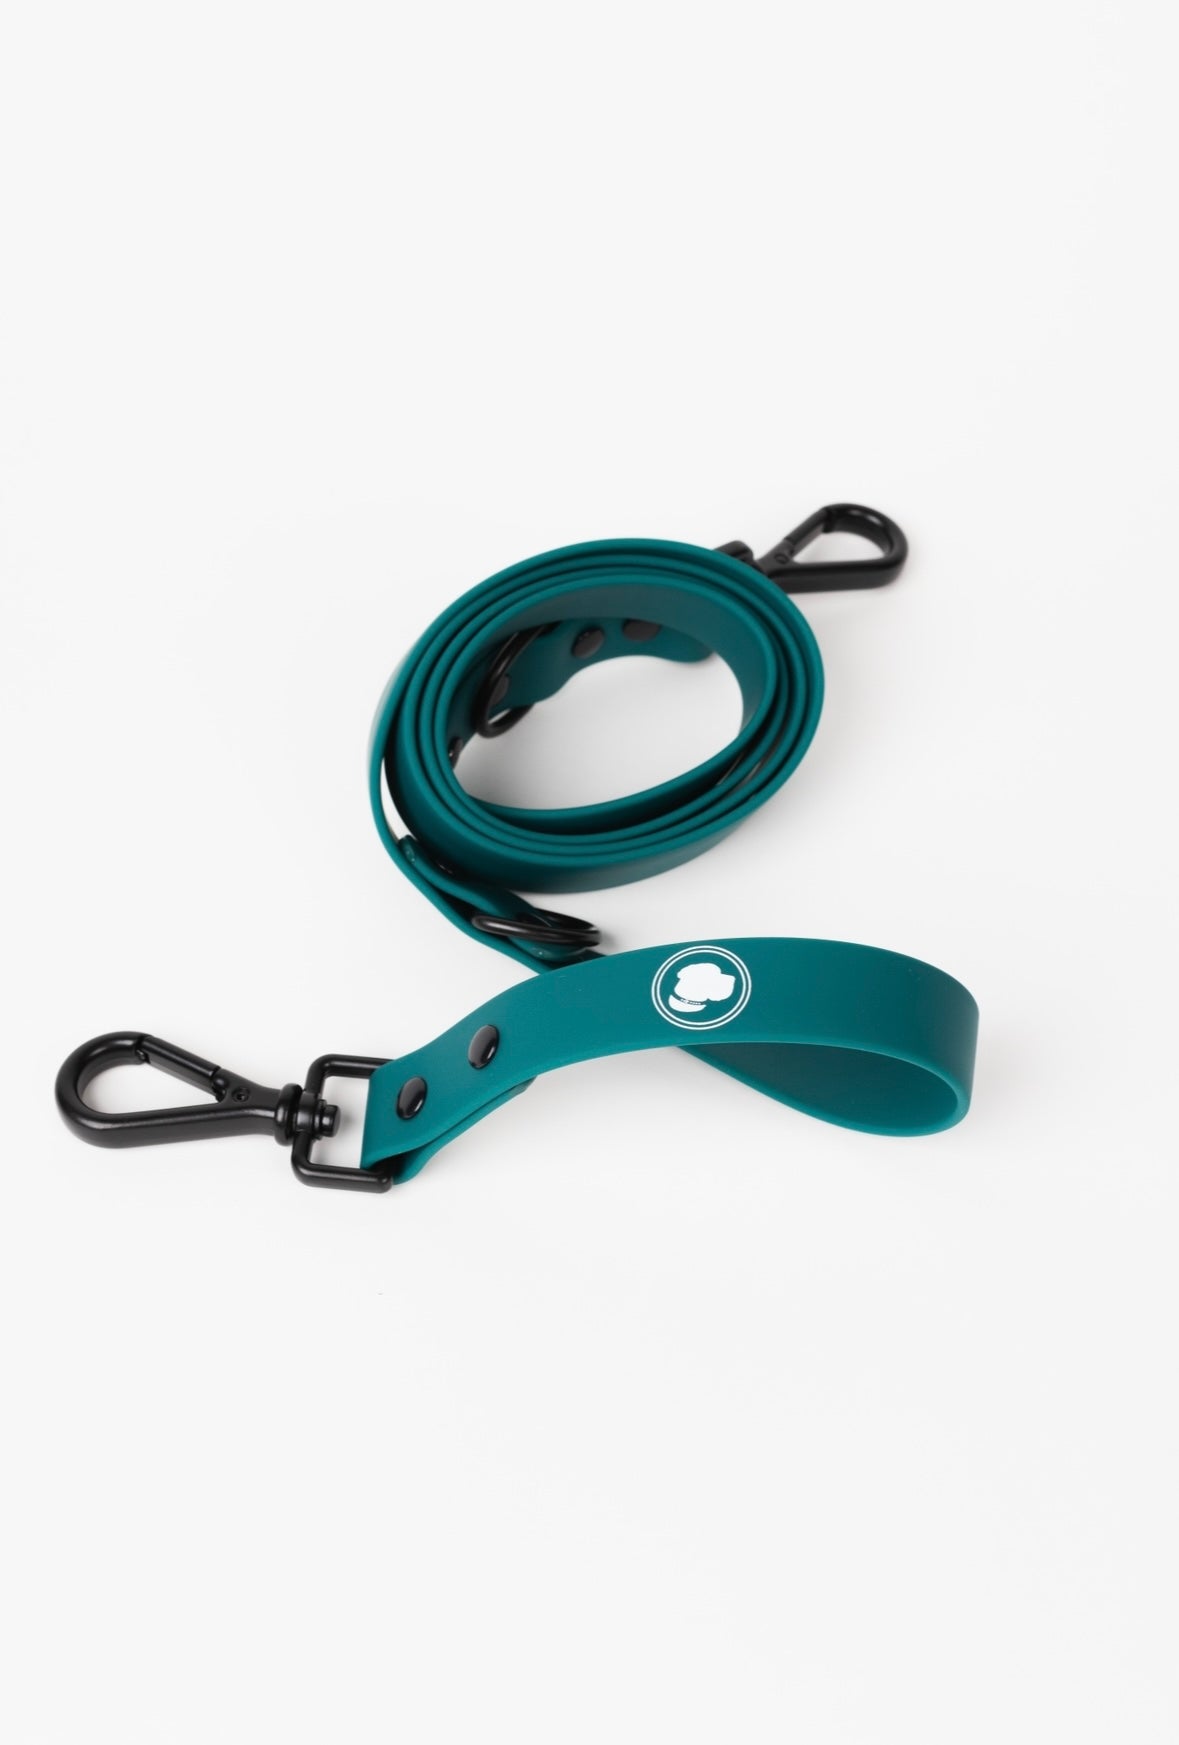 The Modern Dog Company - Forest Green Adjustable Leash